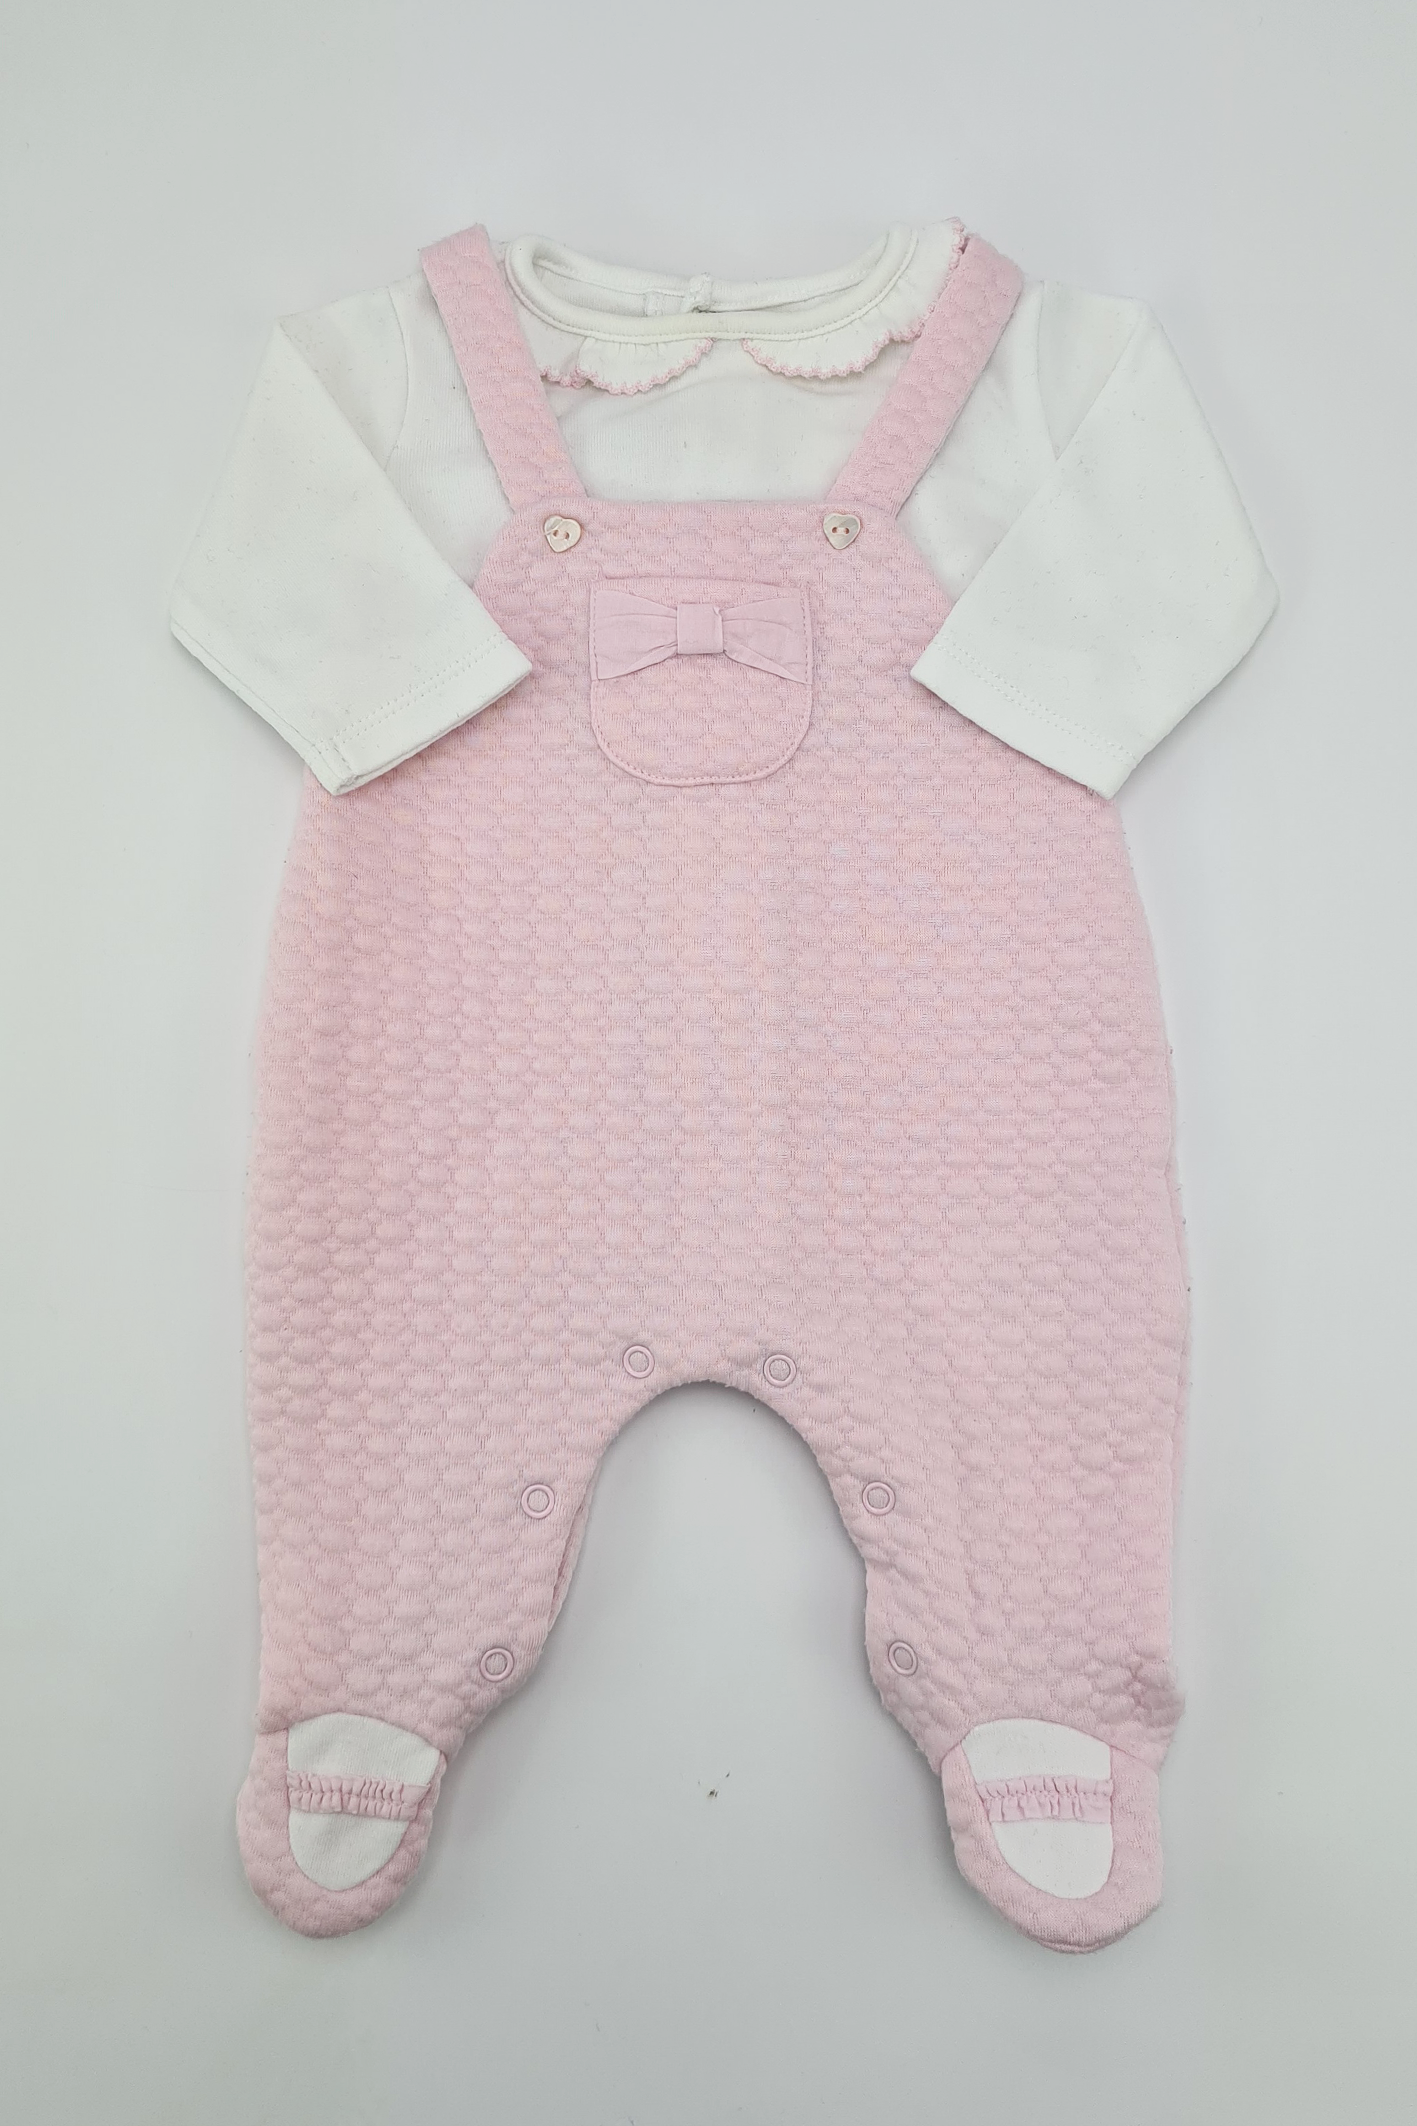 Newborn - Pink Footed Dungaree Outfit